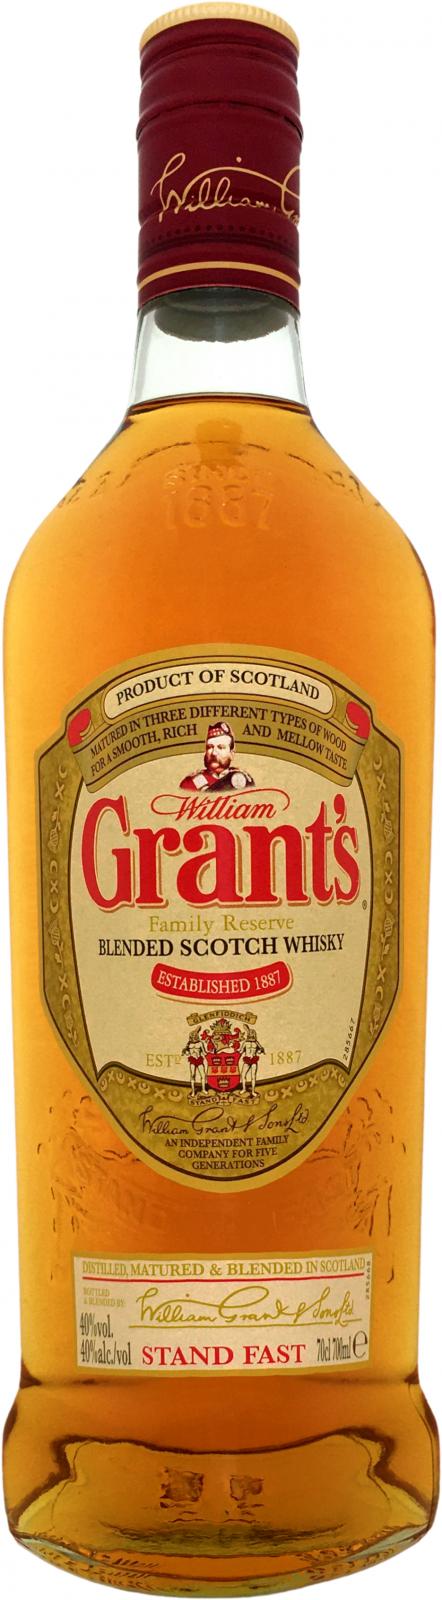 Grant's Stand Fast LIDL 40% 700ml